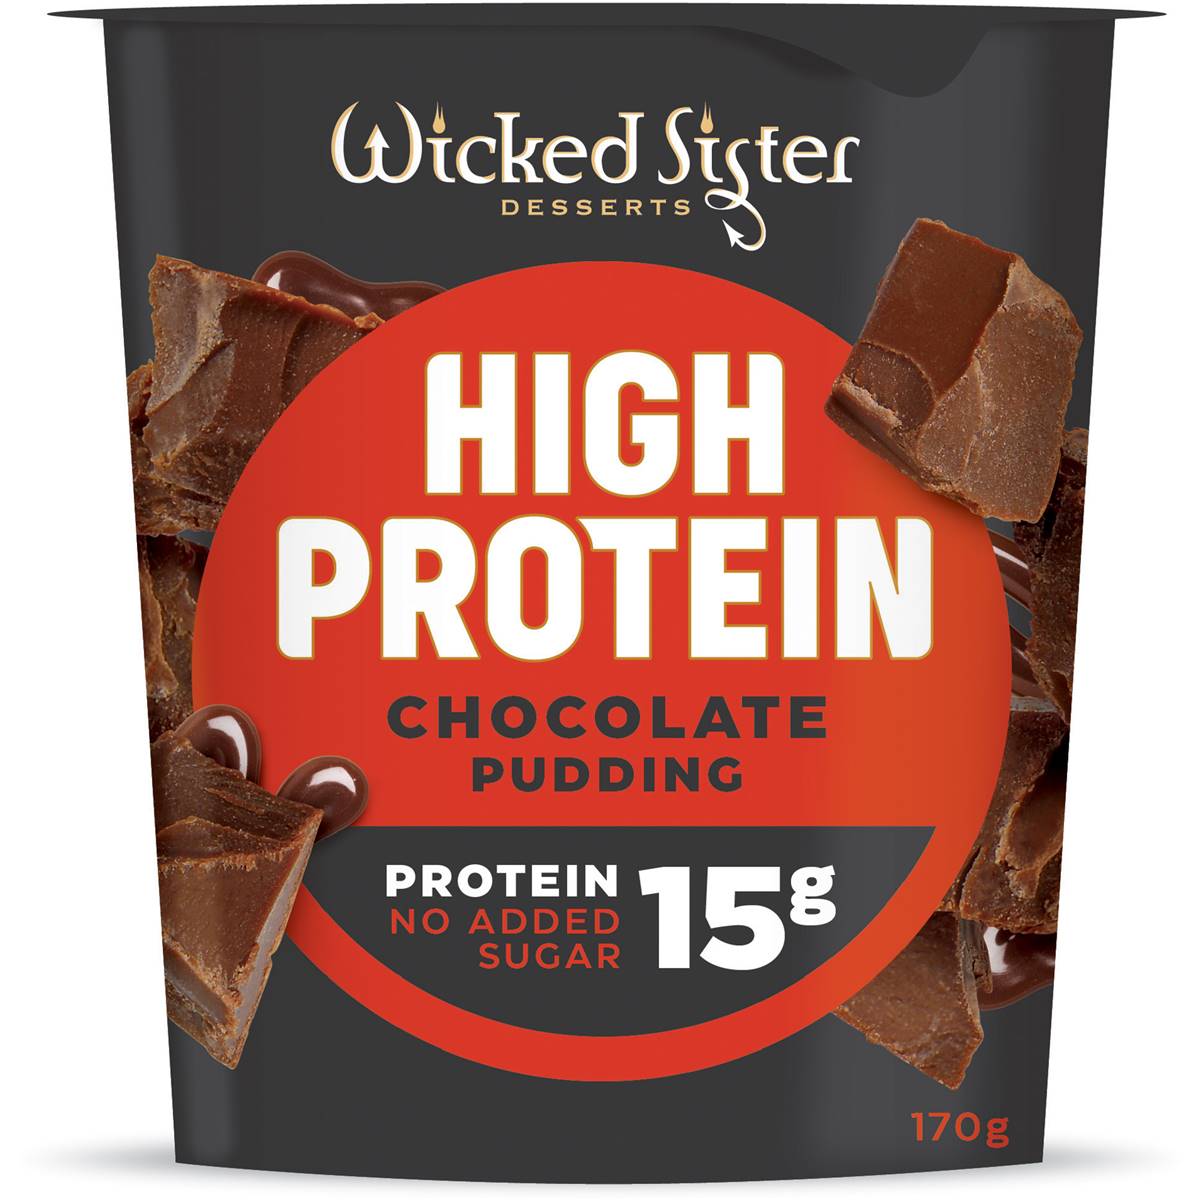 Calories in Wicked Sister High Protein Chocolate Pudding